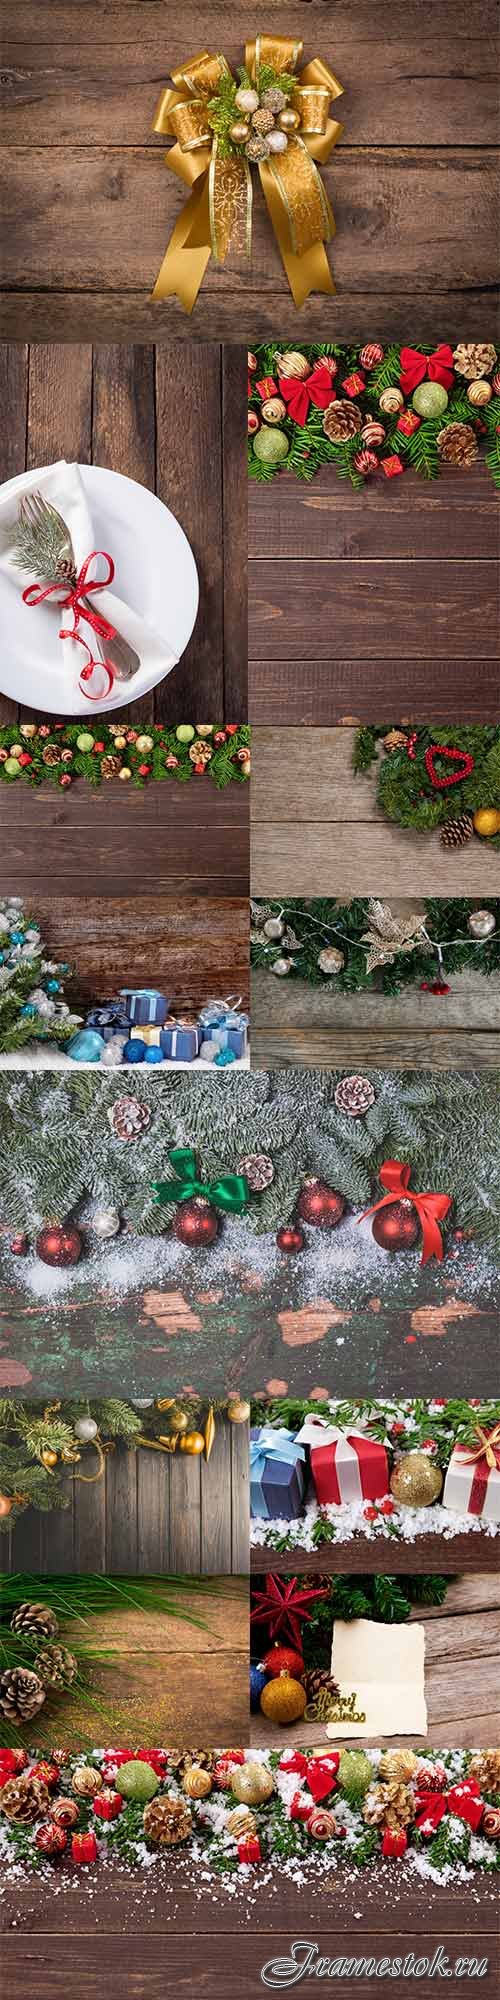 Wooden backgrounds with Christmas decorations 2